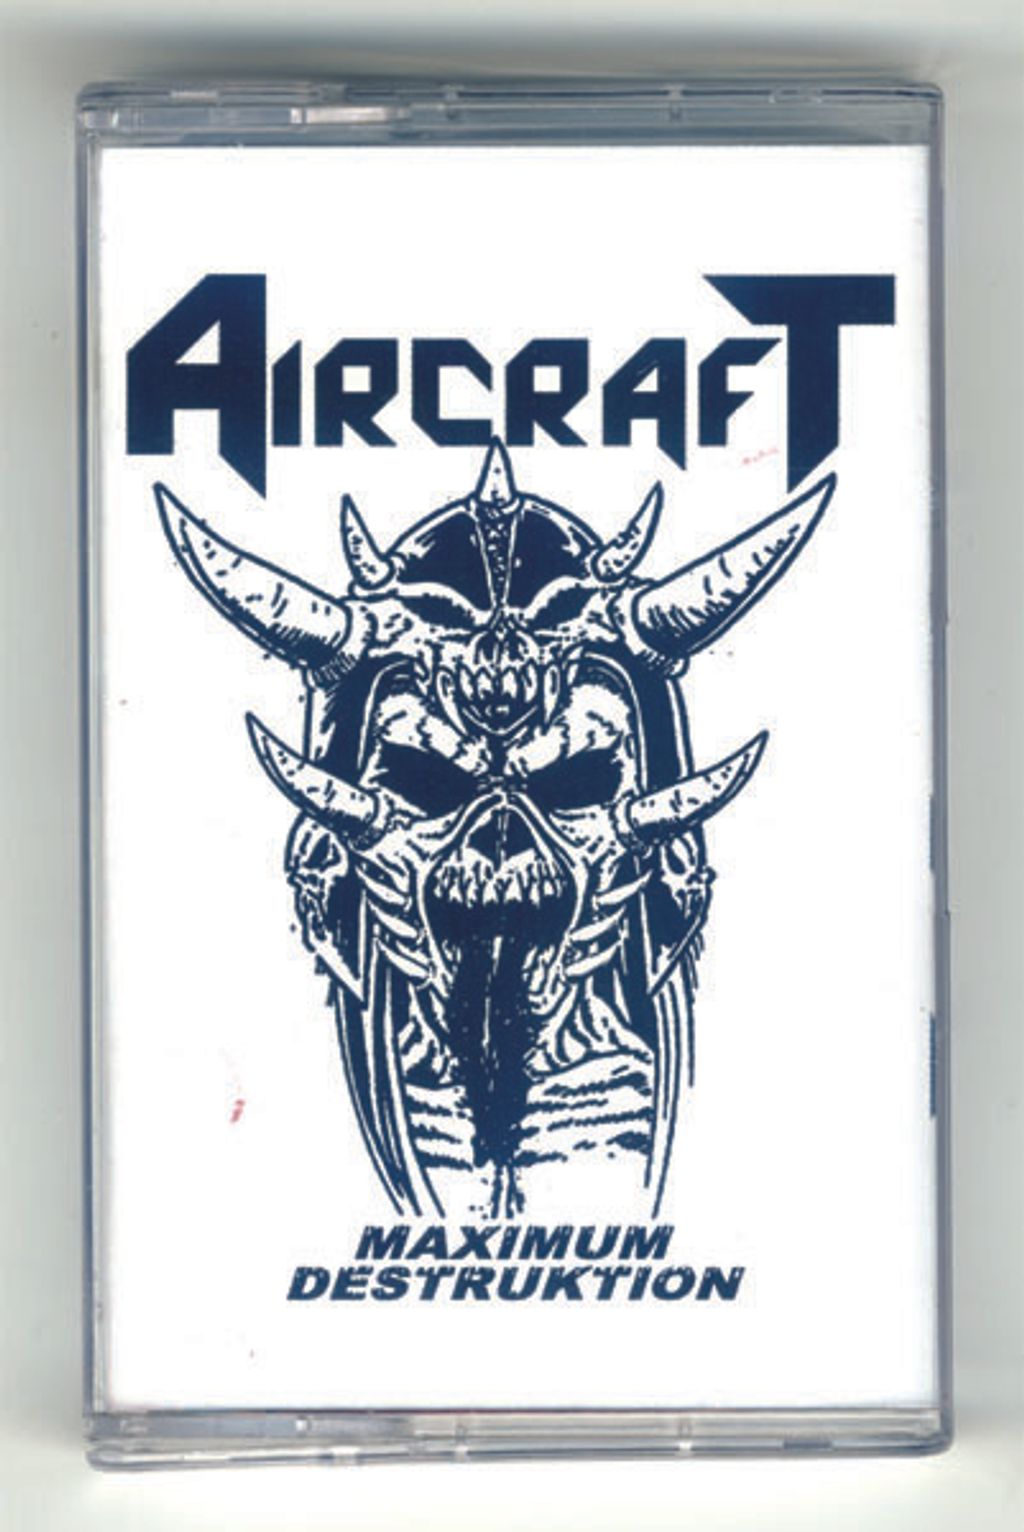 aircraft front cover.jpg